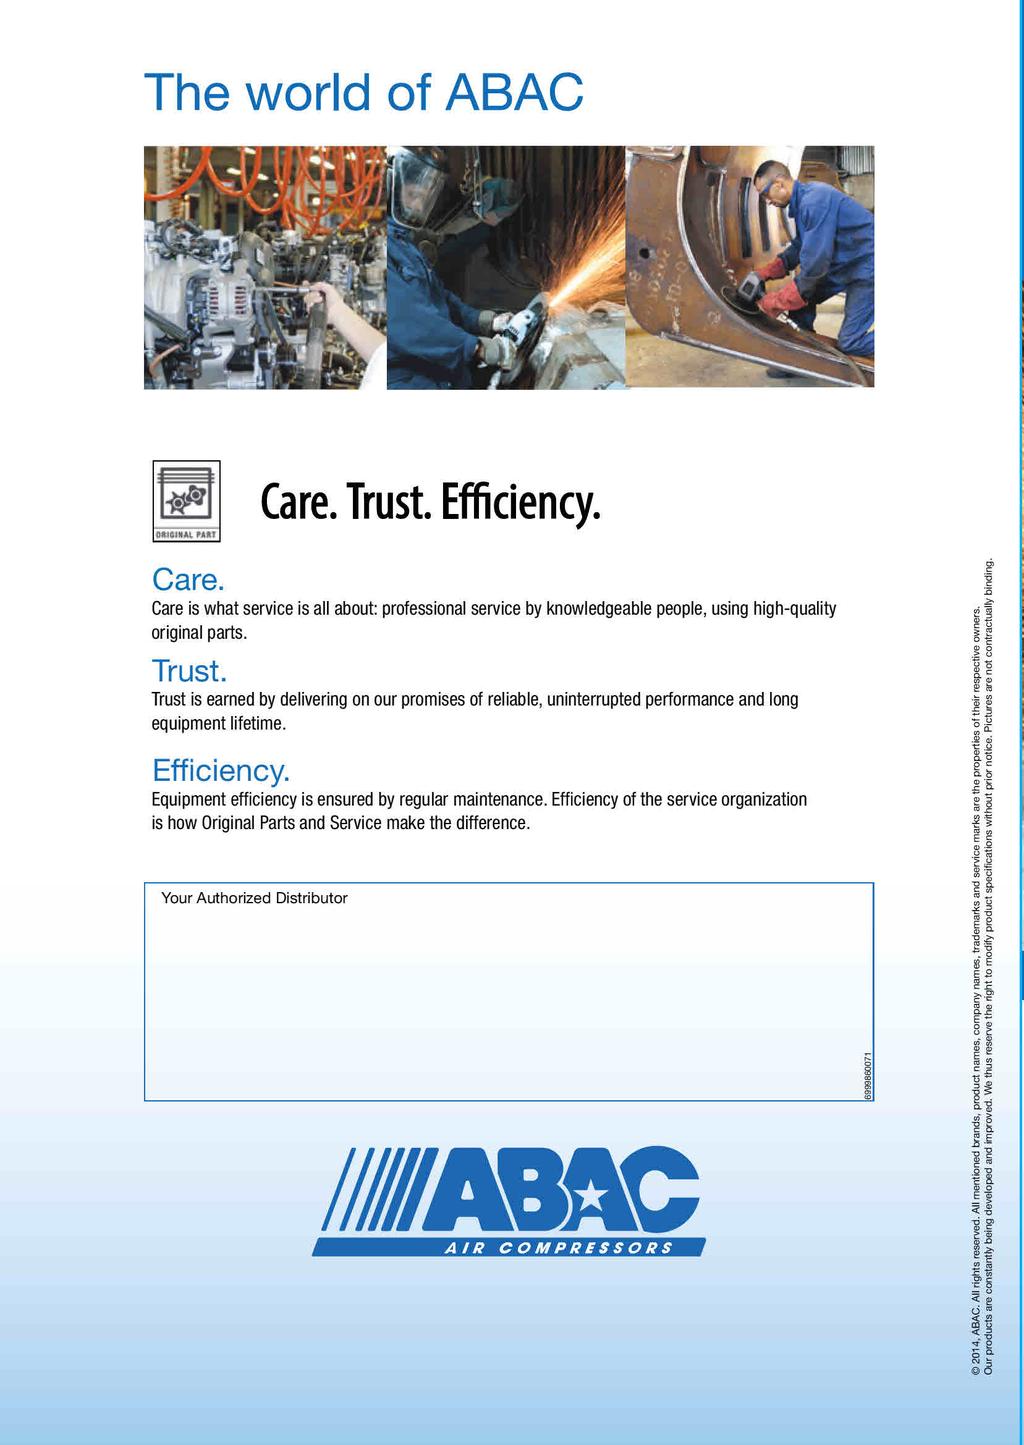 The world of ABAC o Care. Trust. Efficiency. aatamak. PÁRI Gare. Care is what service is ali about: professional service by knowledgeable people, using high-quality original parts. Trust. Trust is earned by delivering on our promises of reliable, uninterrupted performance and long equipment lifetime.